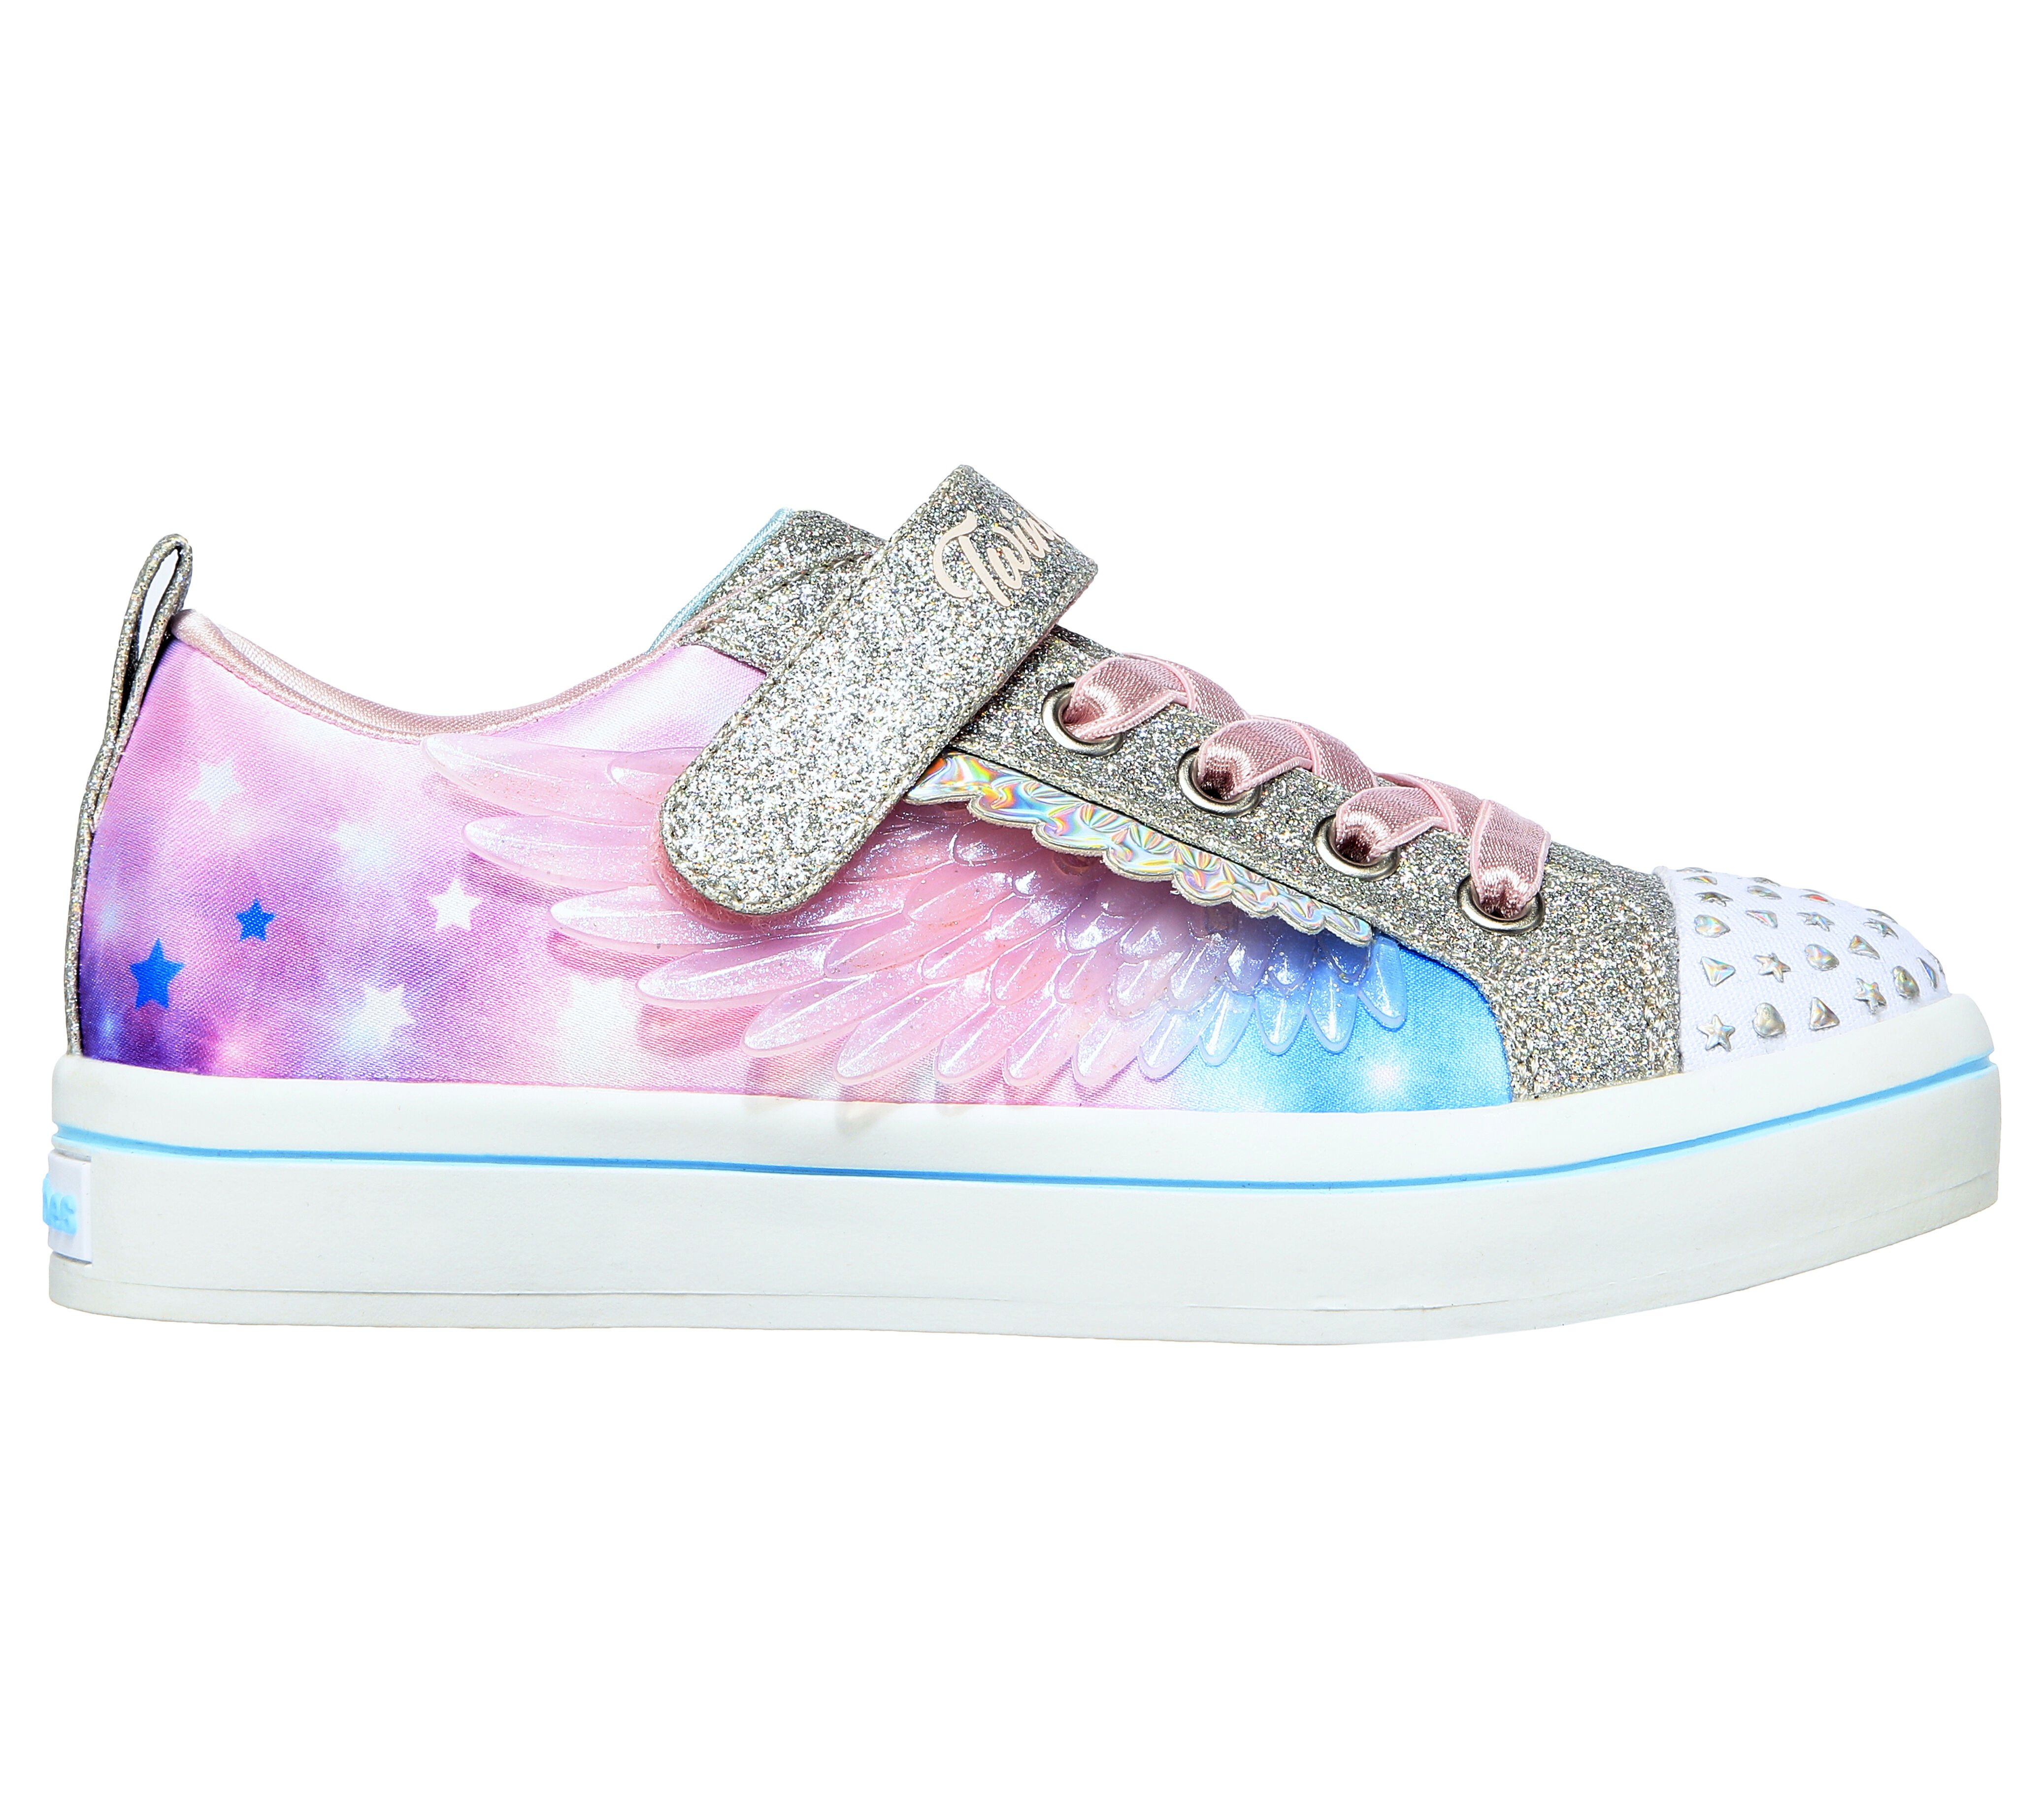 skechers twinkle toes canvas shoes children's